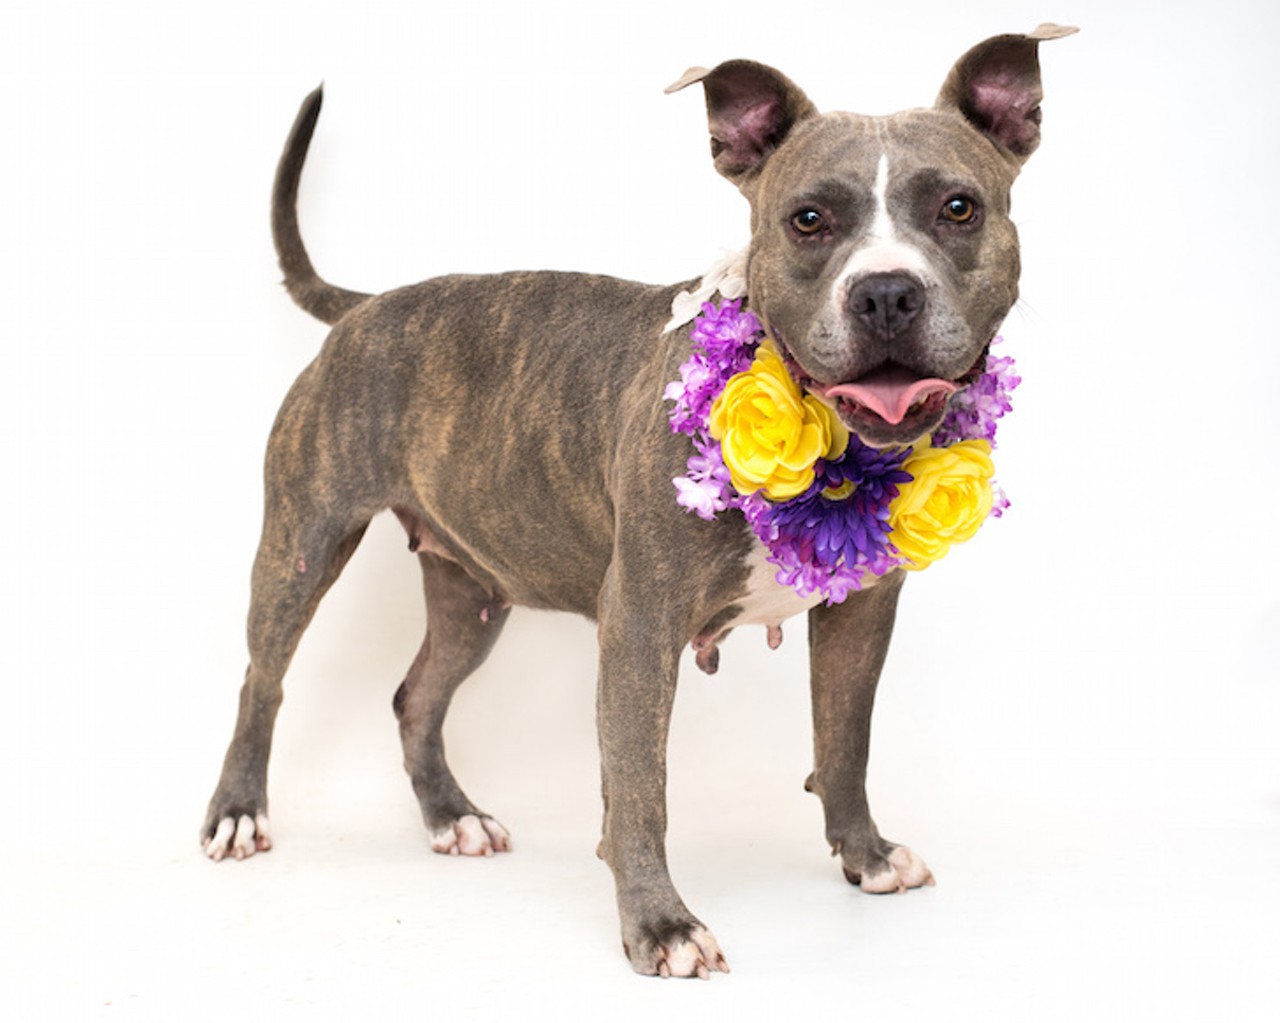 20 adoptable Orlando dogs who would love a new human